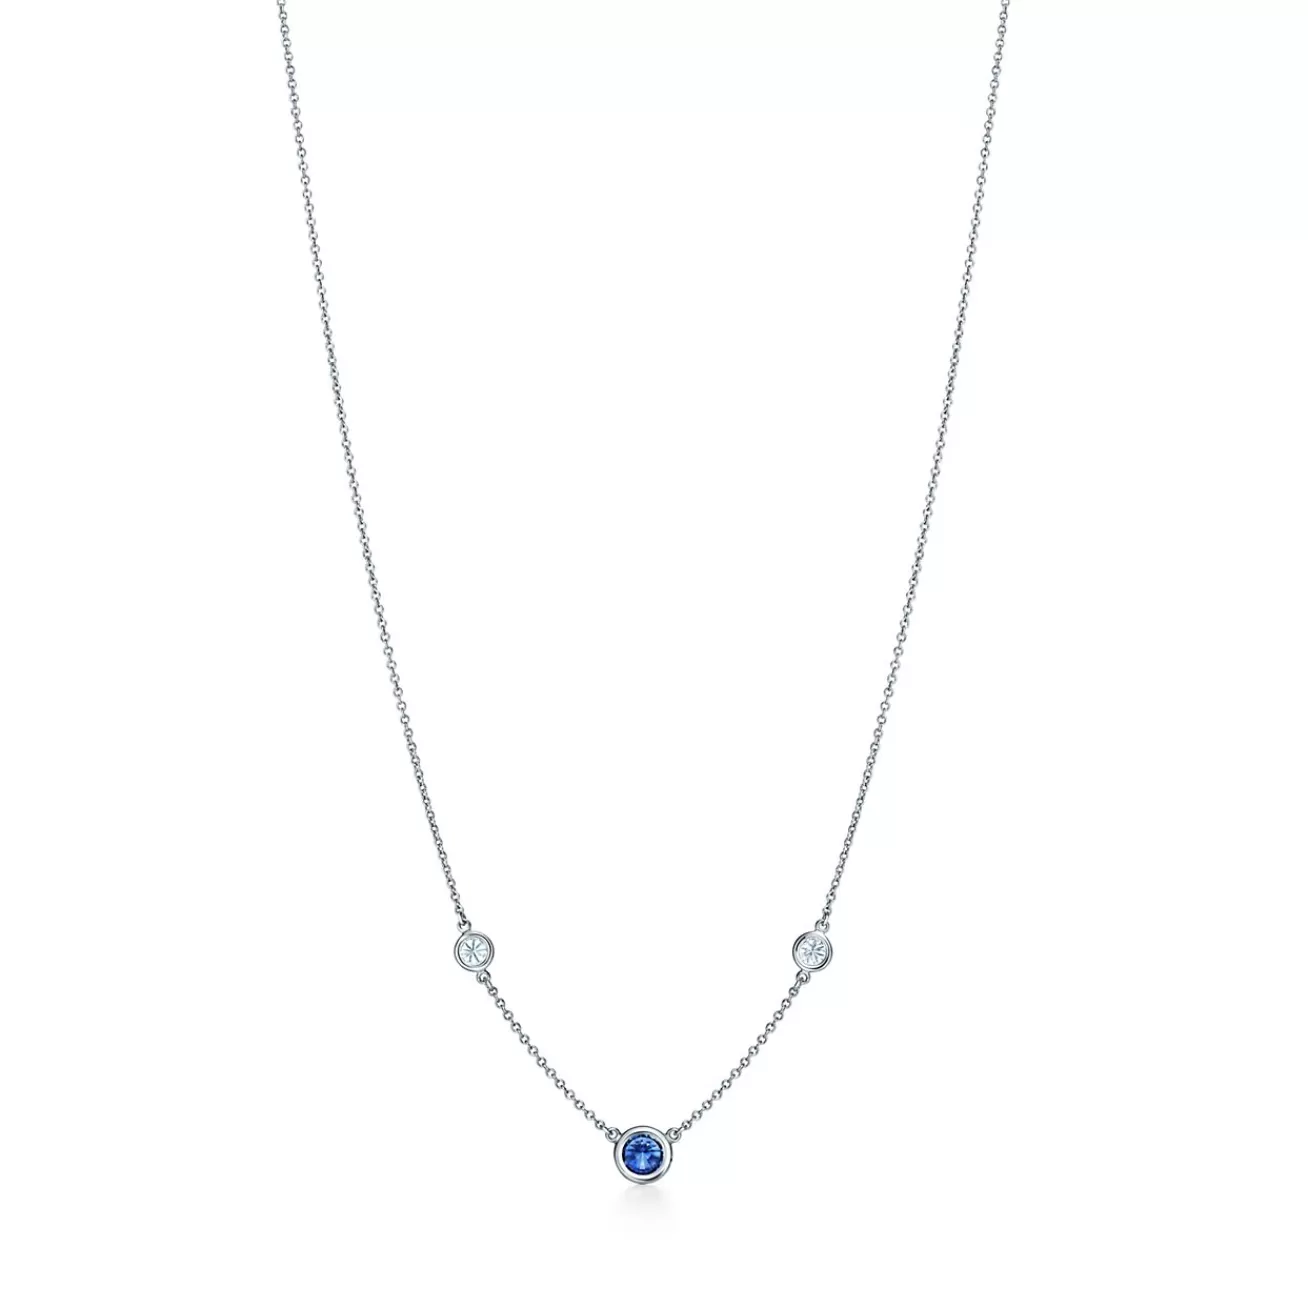 Tiffany & Co. Elsa Peretti® Color by the Yard necklace in platinum with sapphire and diamonds. | ^ Necklaces & Pendants | Platinum Jewelry